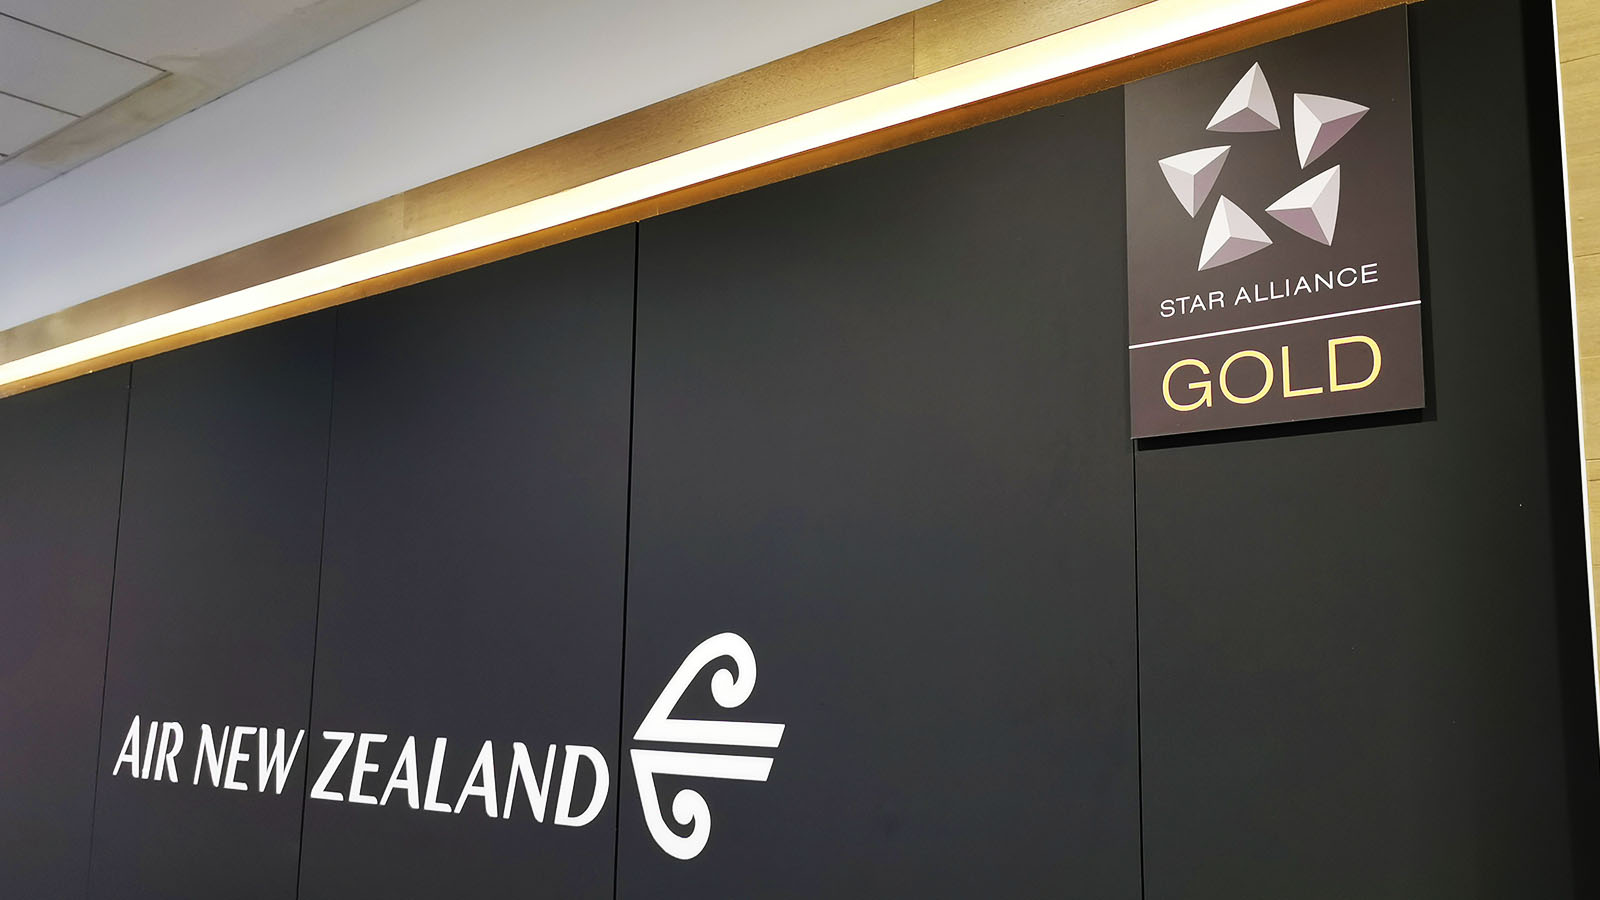 Exterior of Air New Zealand Sydney International Lounge – Point Hacks, by Chris Chamberlin